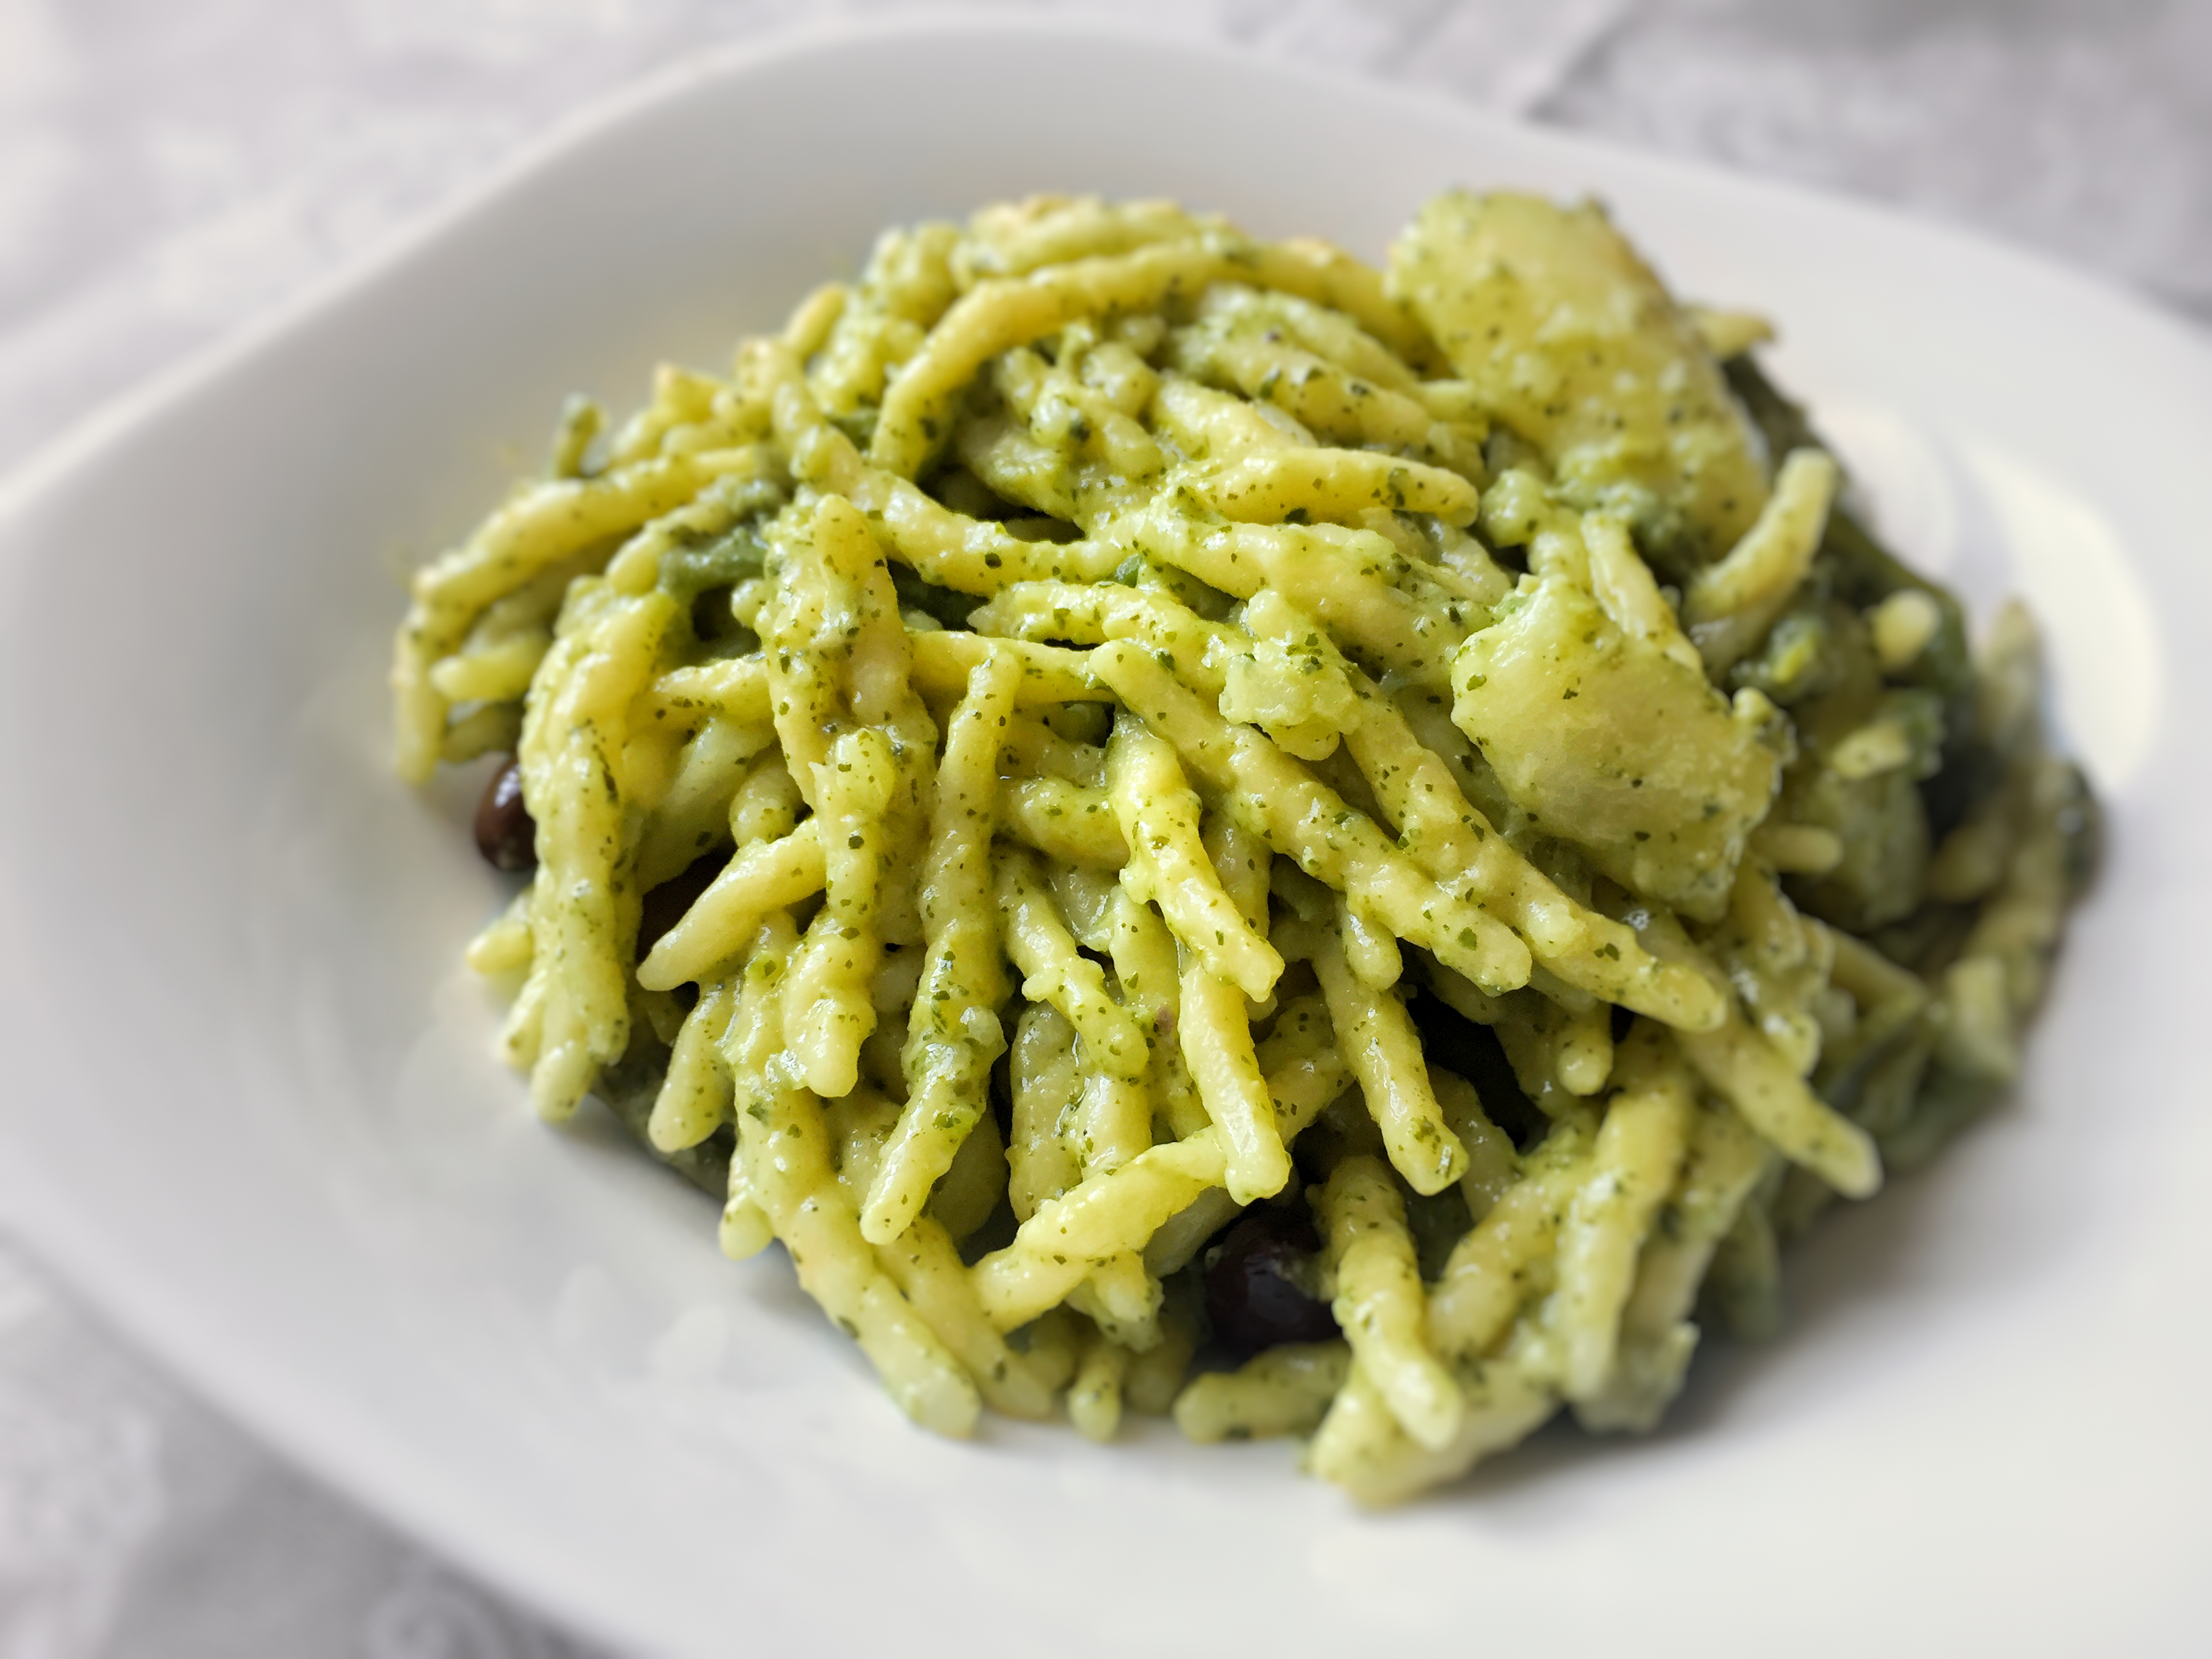 Pesto is one of the most famous traditional italian sauces